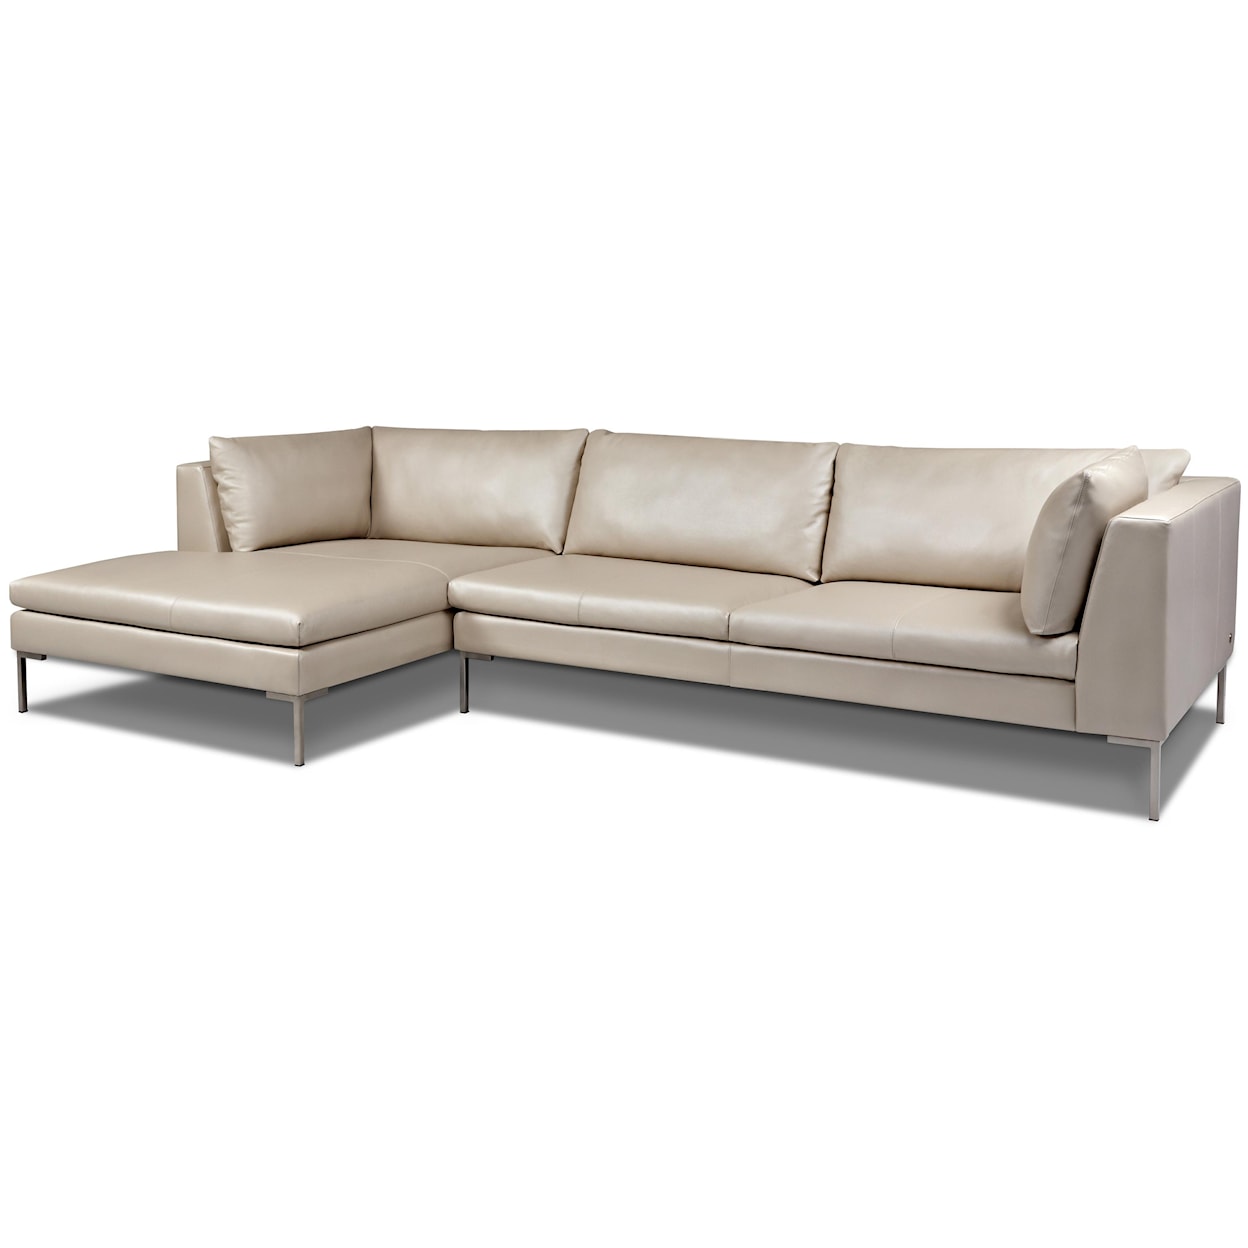 American Leather Inspiration Sectional Sofa